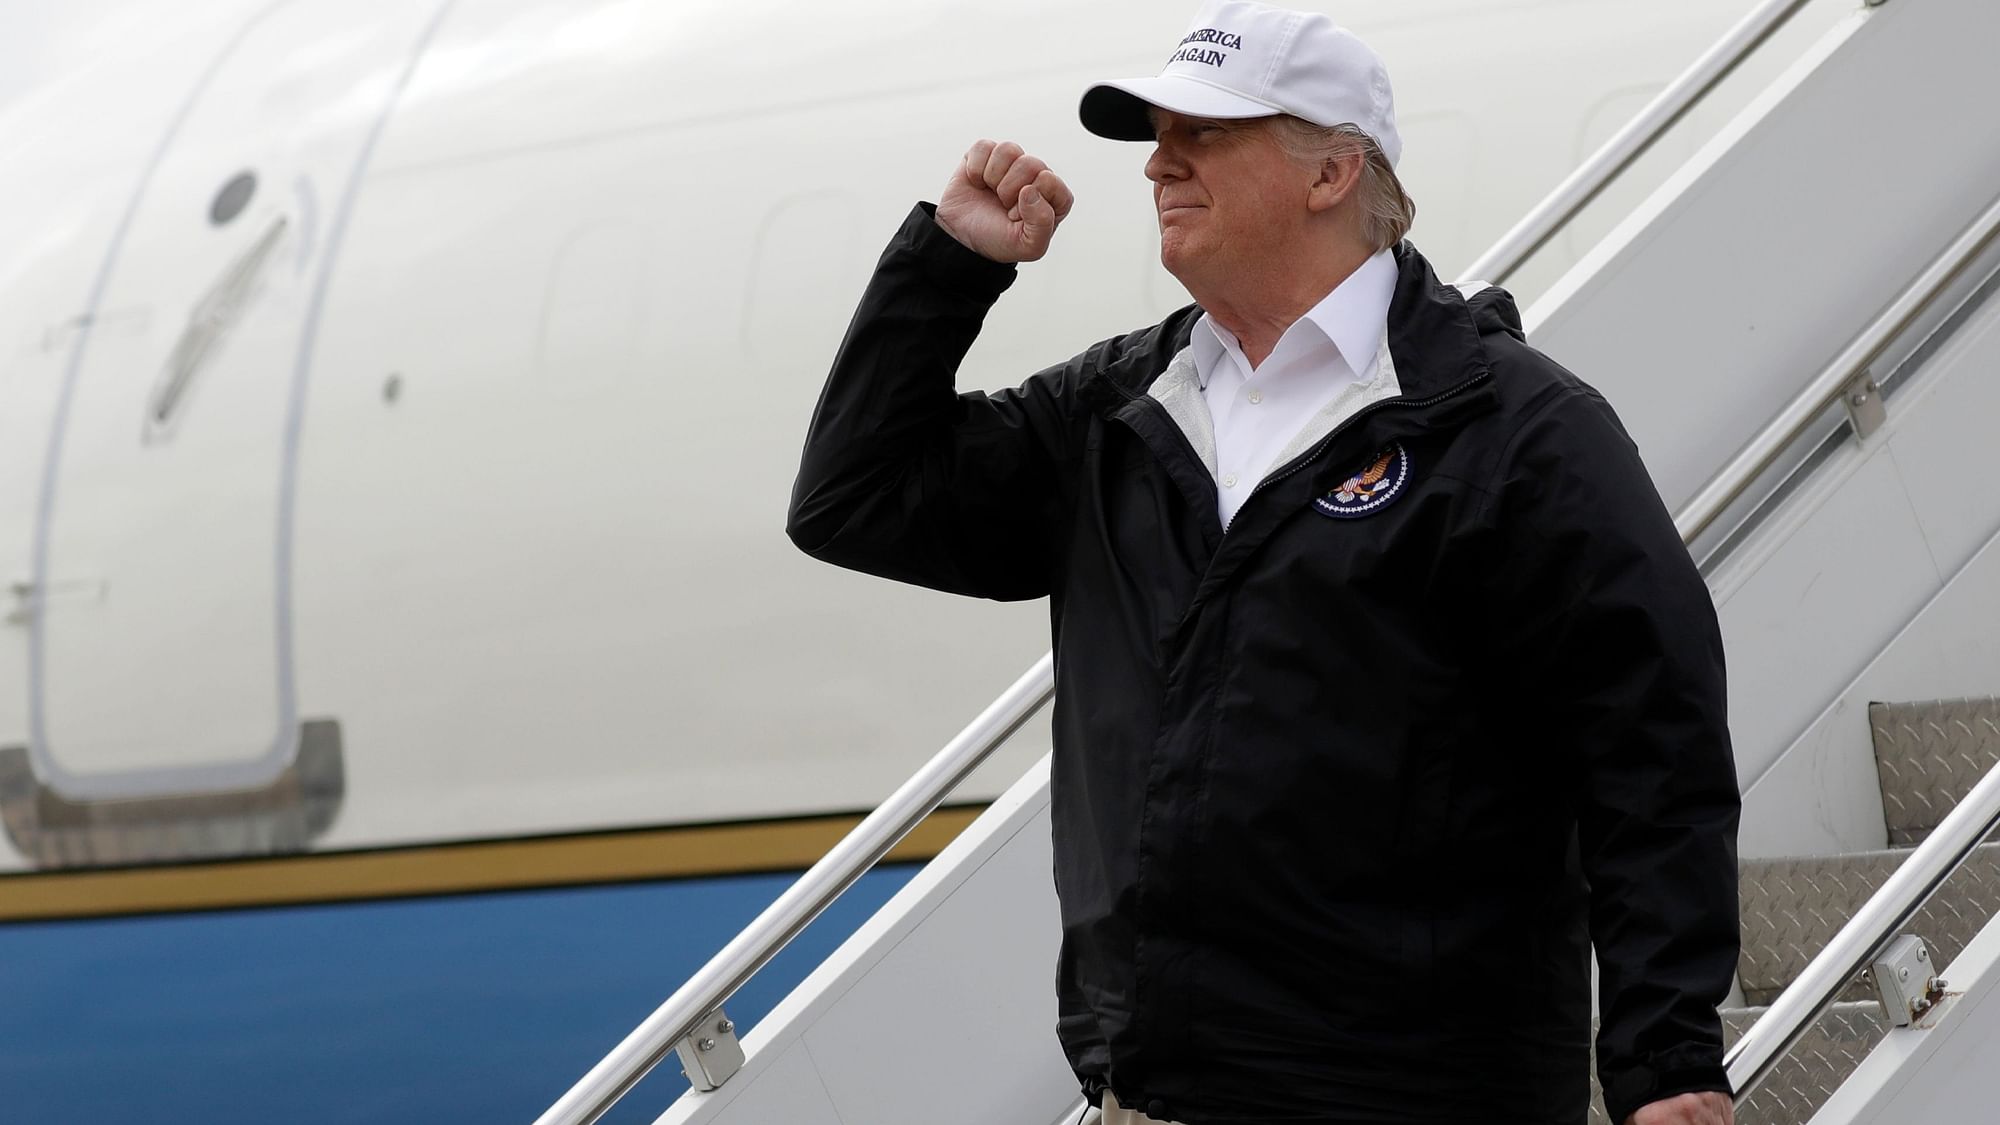 President Donald Trump gestures after arriving at McAllen International Airport for a visit to the southern border.